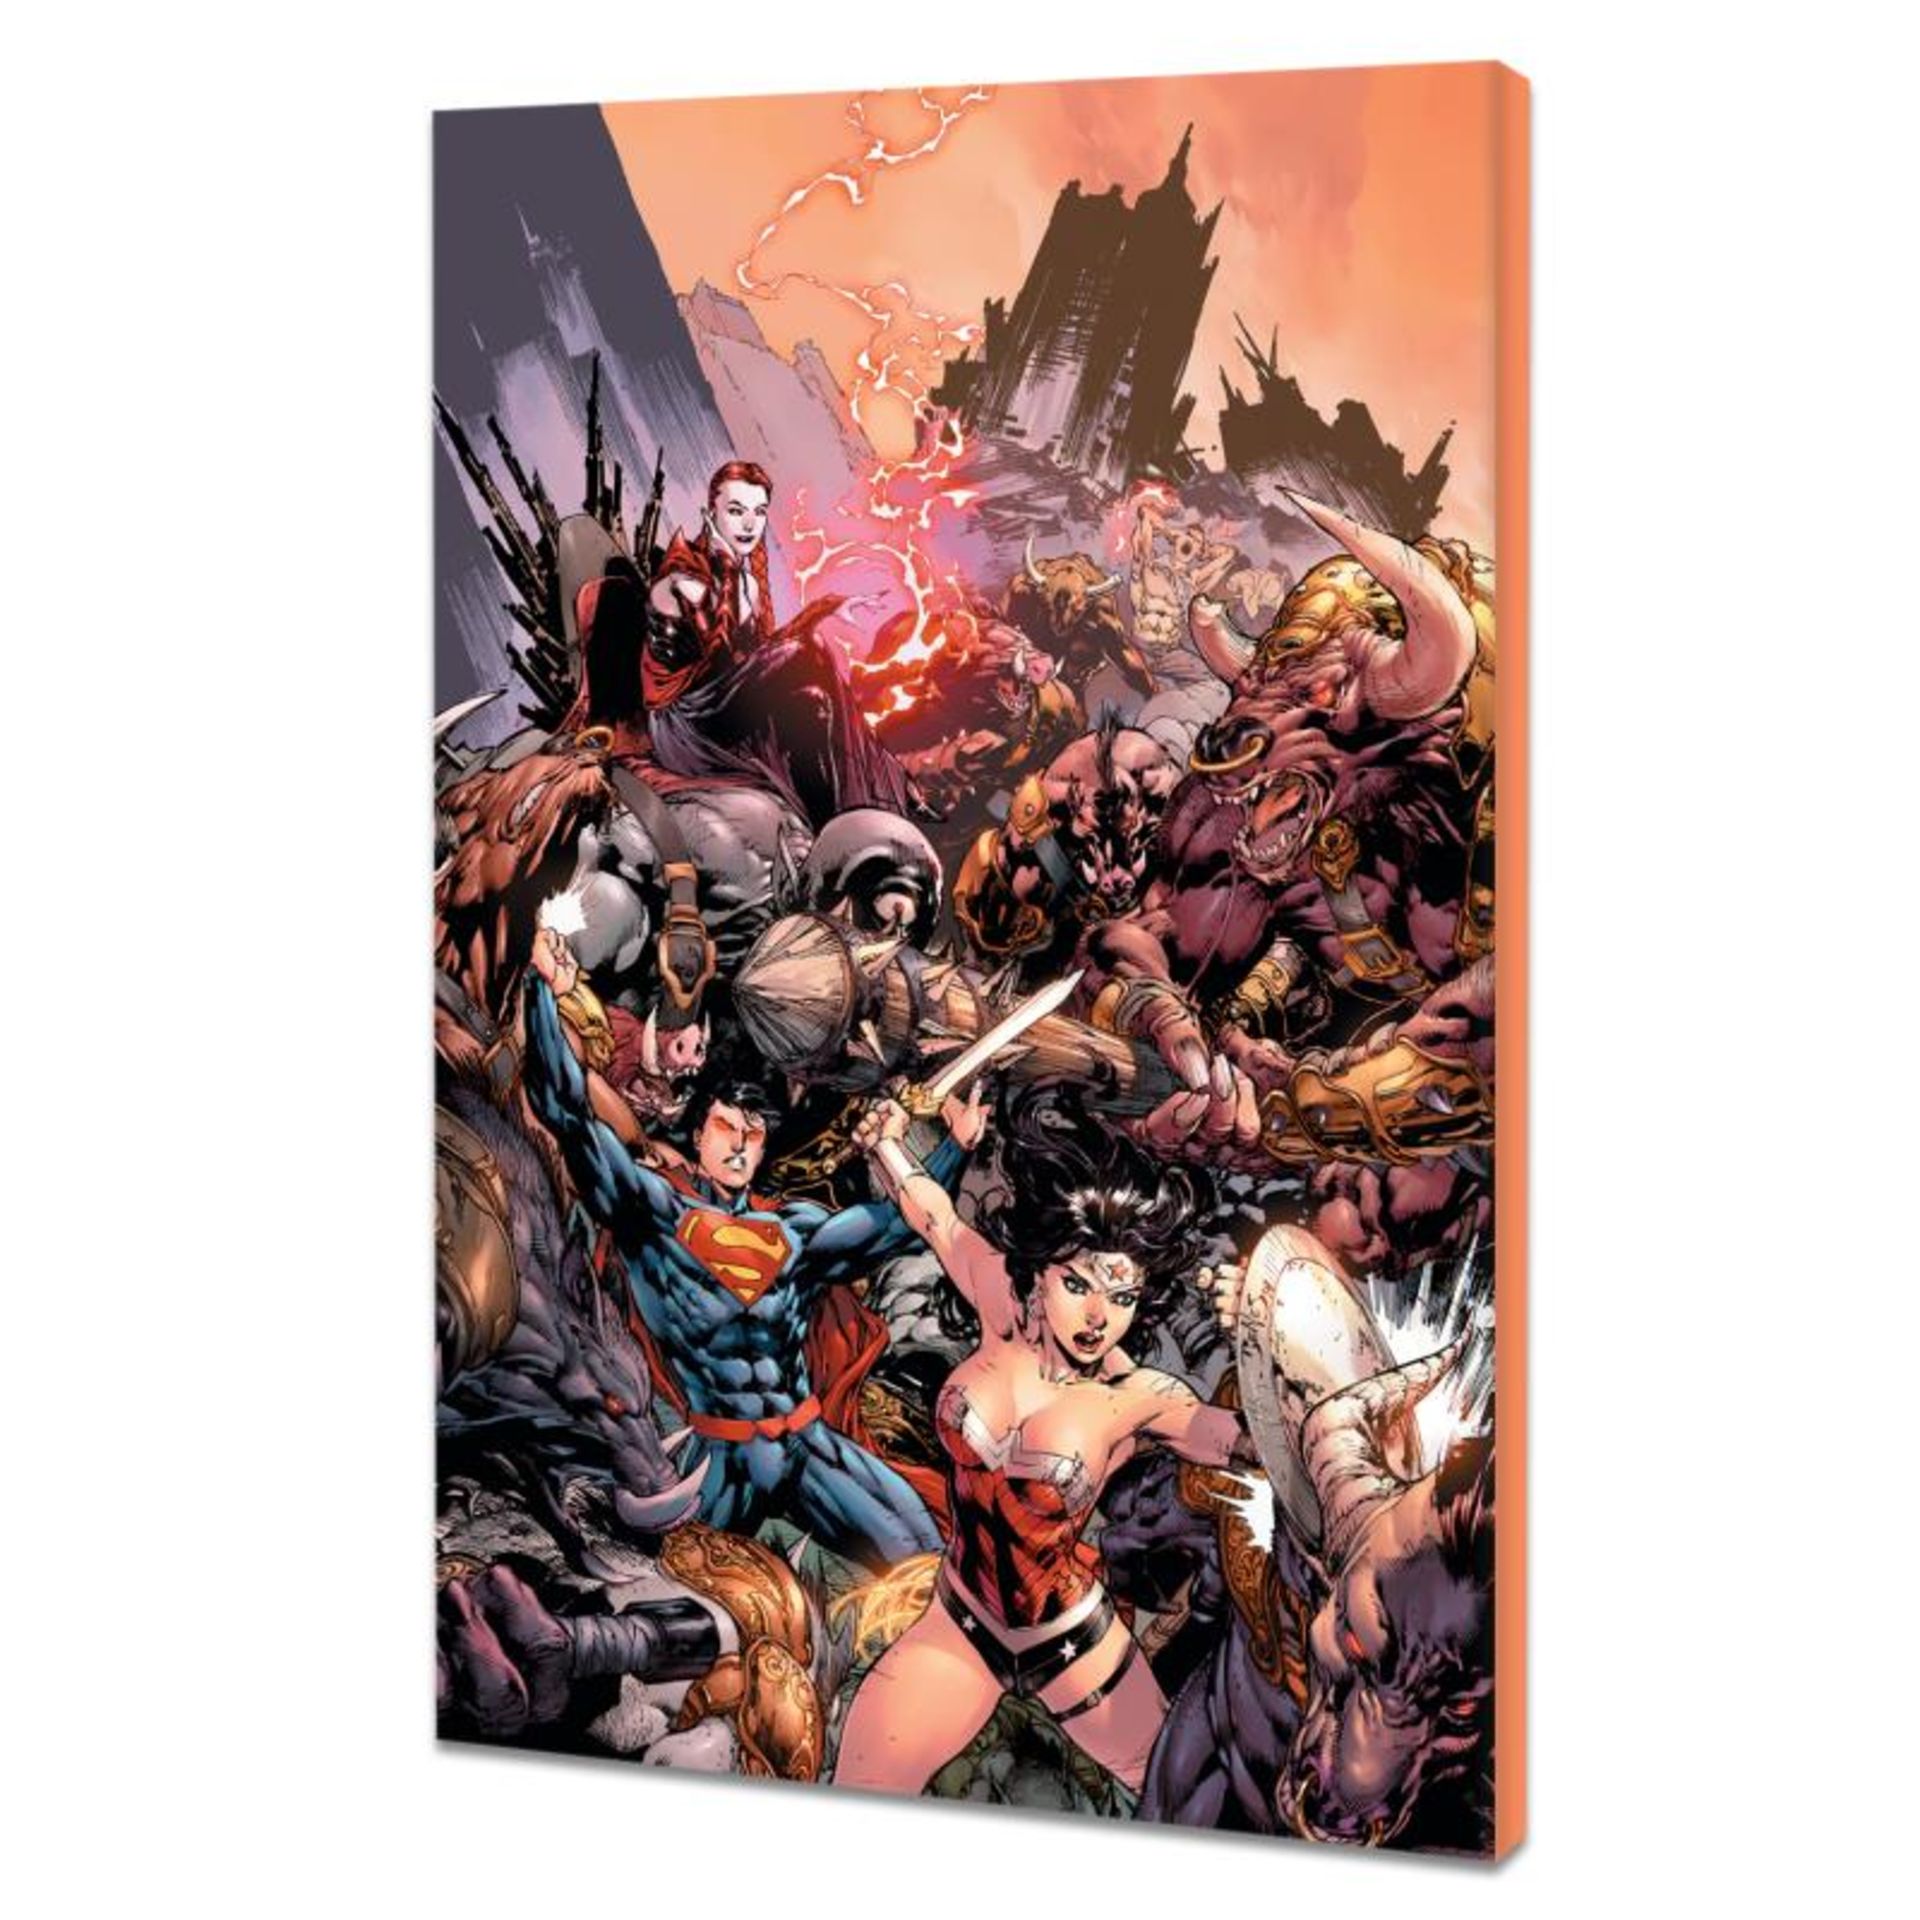 DC Comics, "Superman/ Wonder Woman #17" Numbered Limited Edition Giclee on Canva - Image 3 of 3